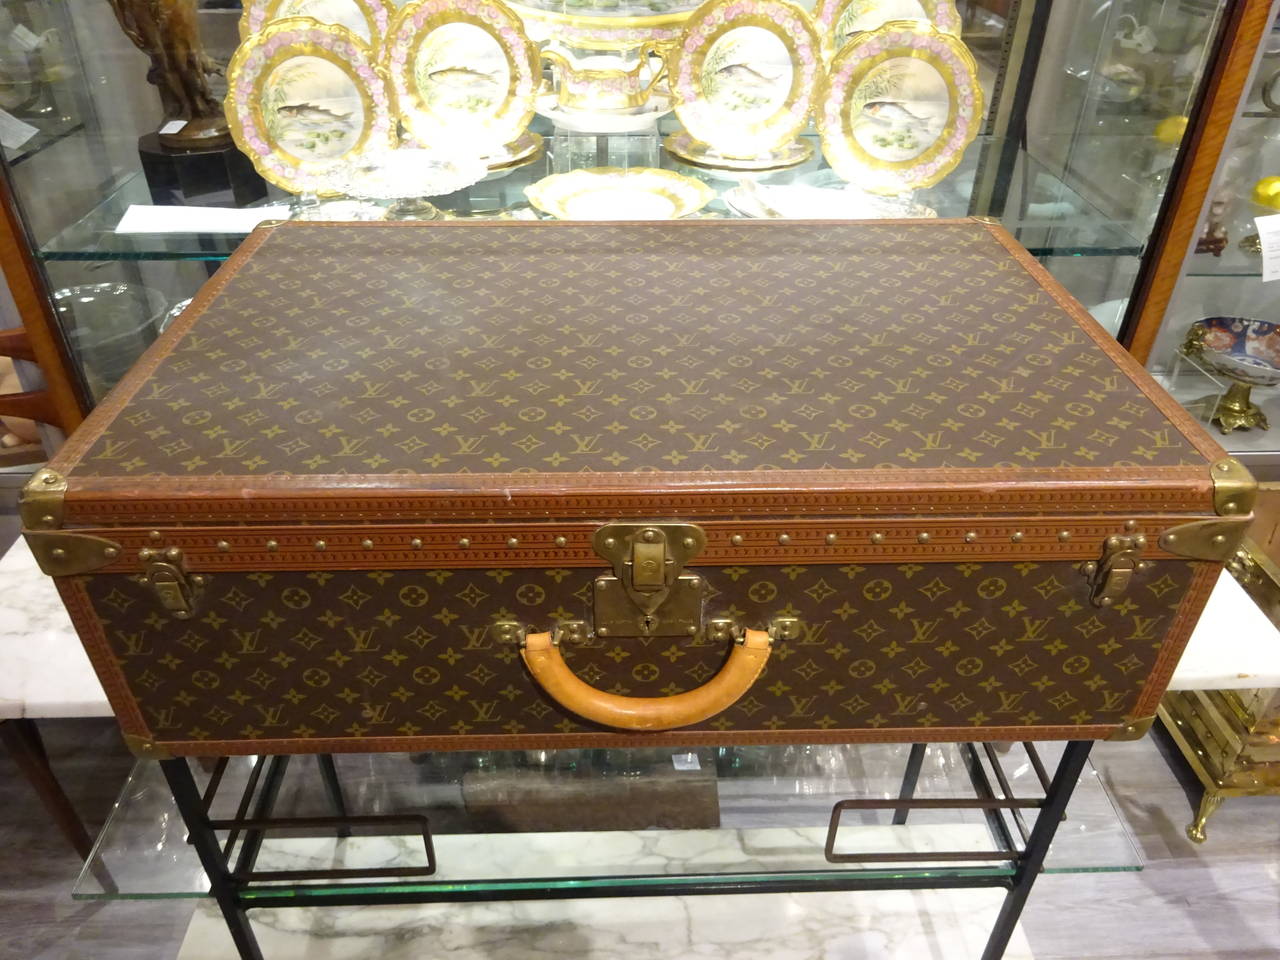 A triple mint jumbo vintage Louis Vuitton monogram hardshell suitcase including insert tray, original straps, luggage tag and keys. Manufactured for special order through Louis Vuitton's workshop in Asniéres-Sur-Seine, France.